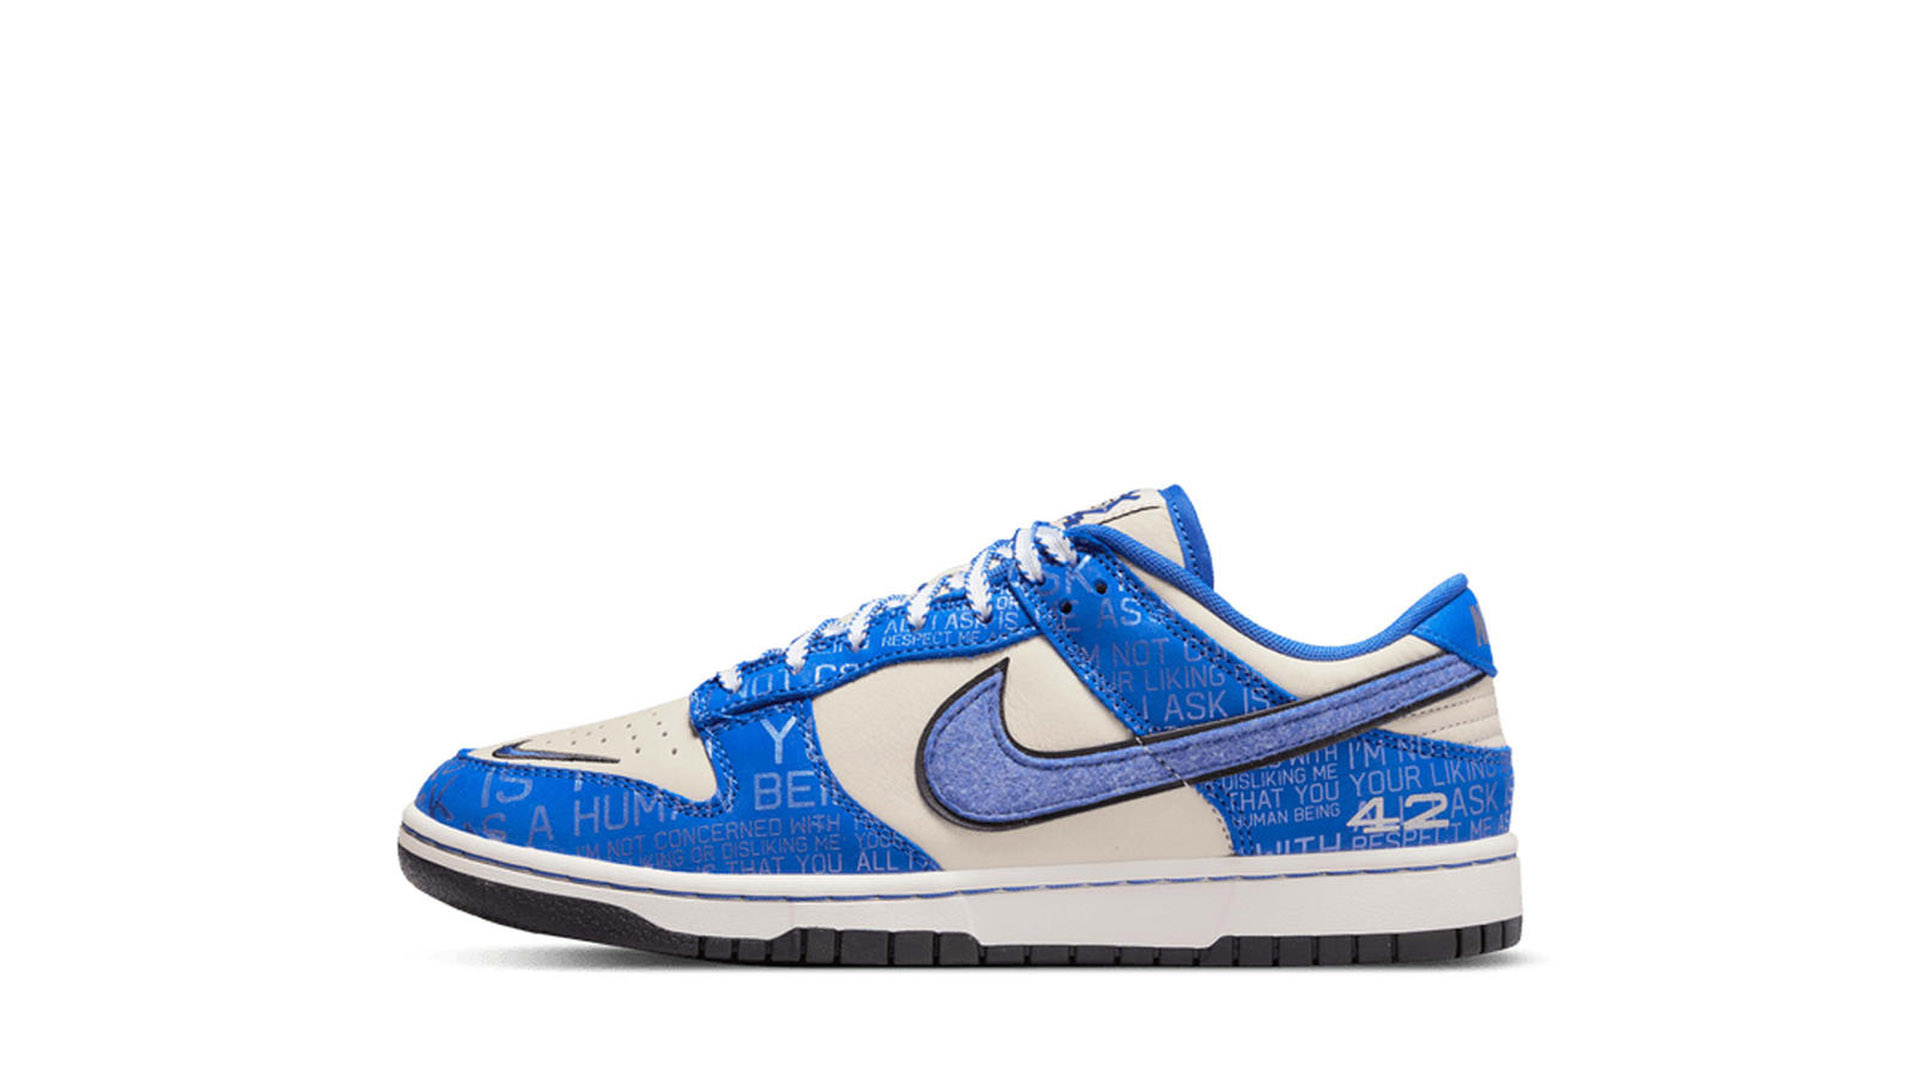 My Nike By You Chicago inspired Dunks. I was going to get the